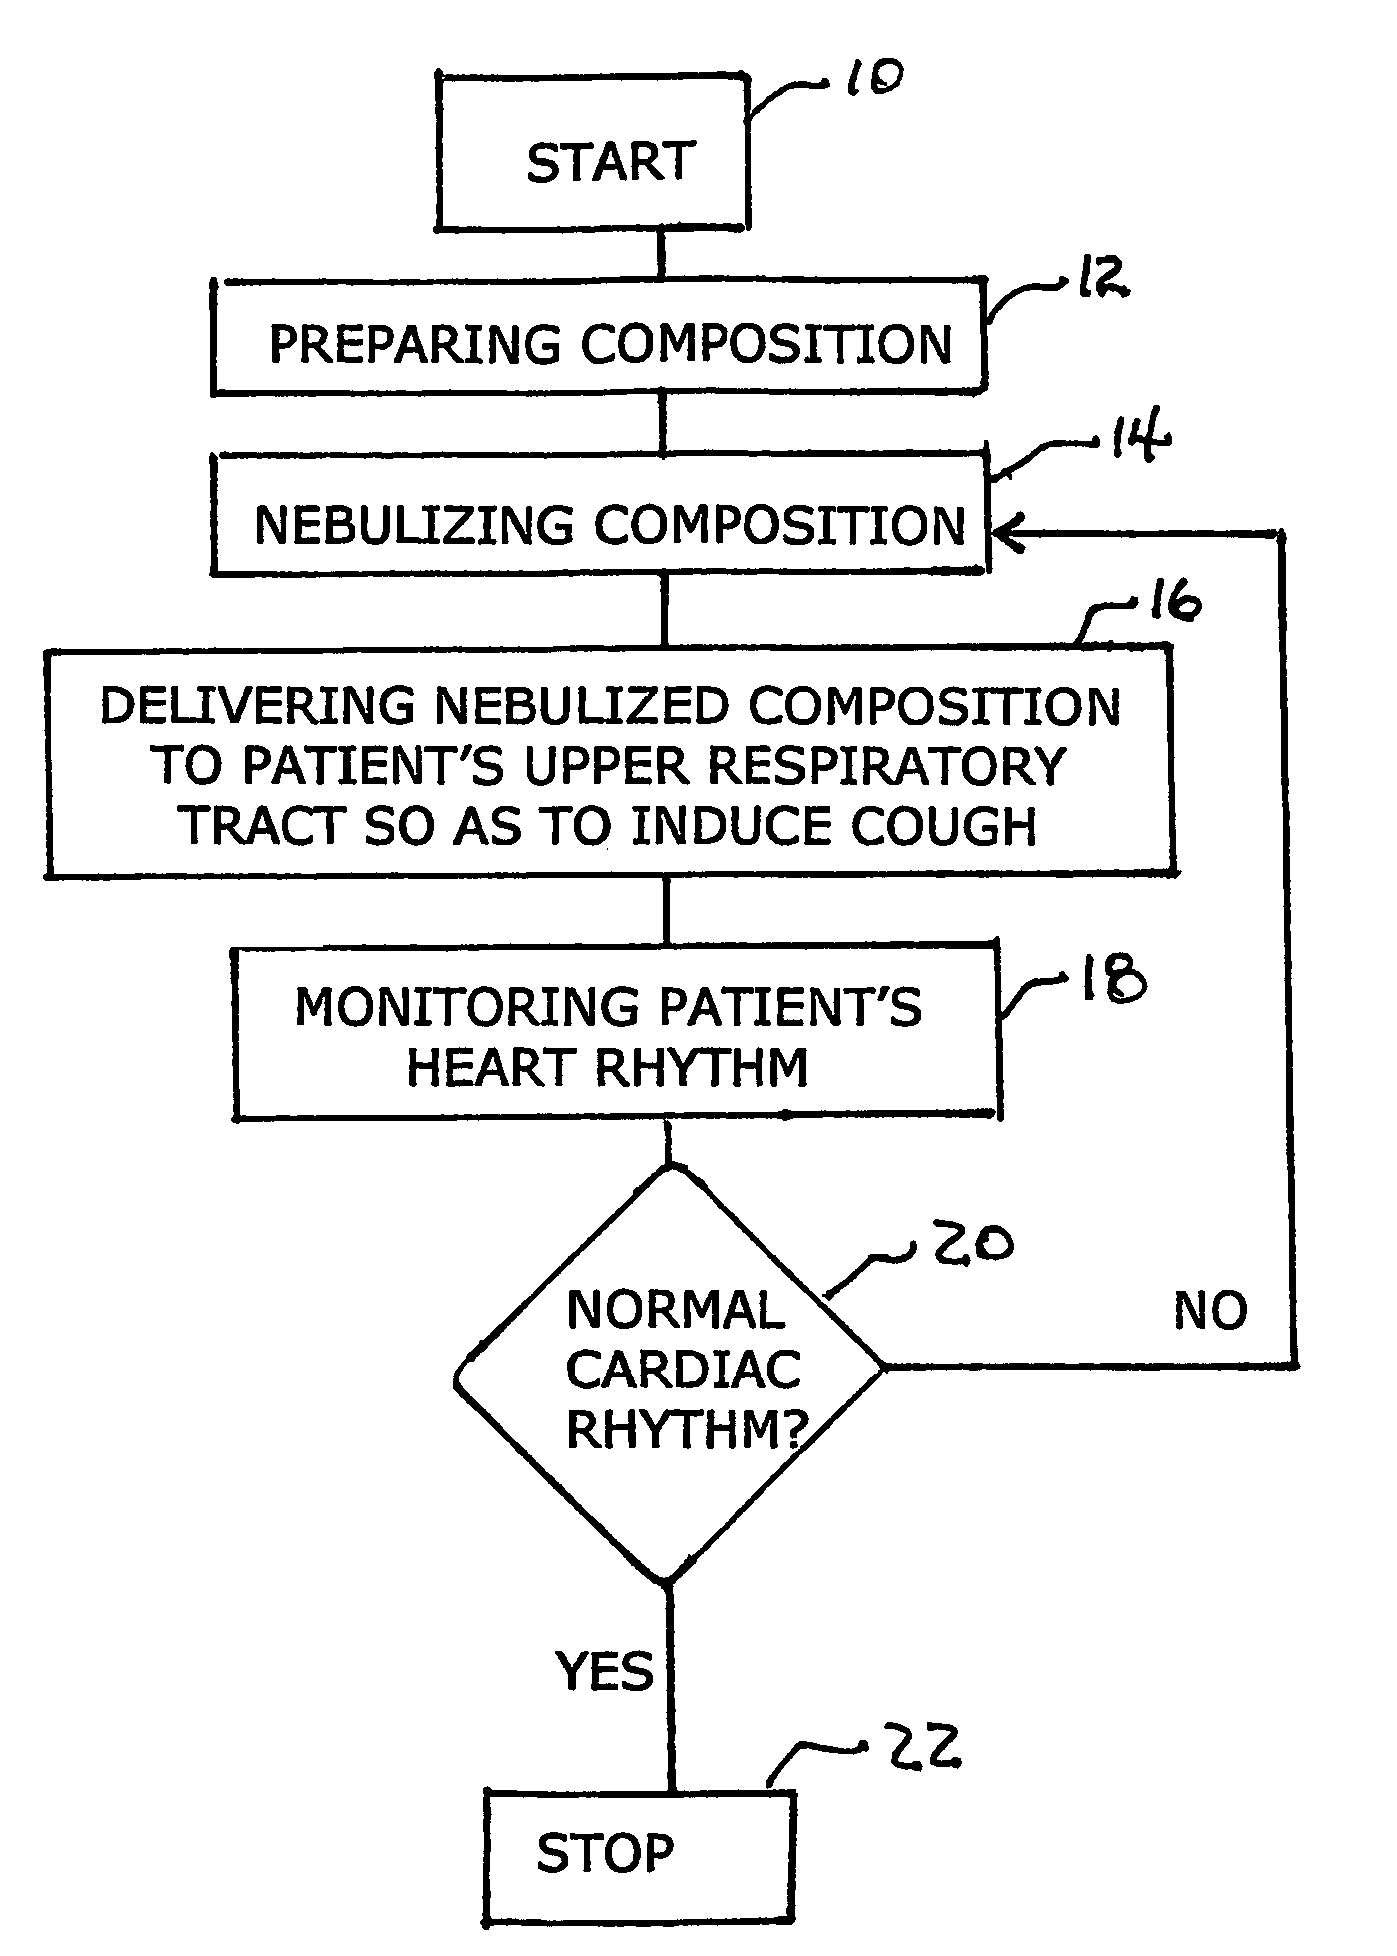 Apparatus and method for self-induced cough cardiopulmonary resuscitation